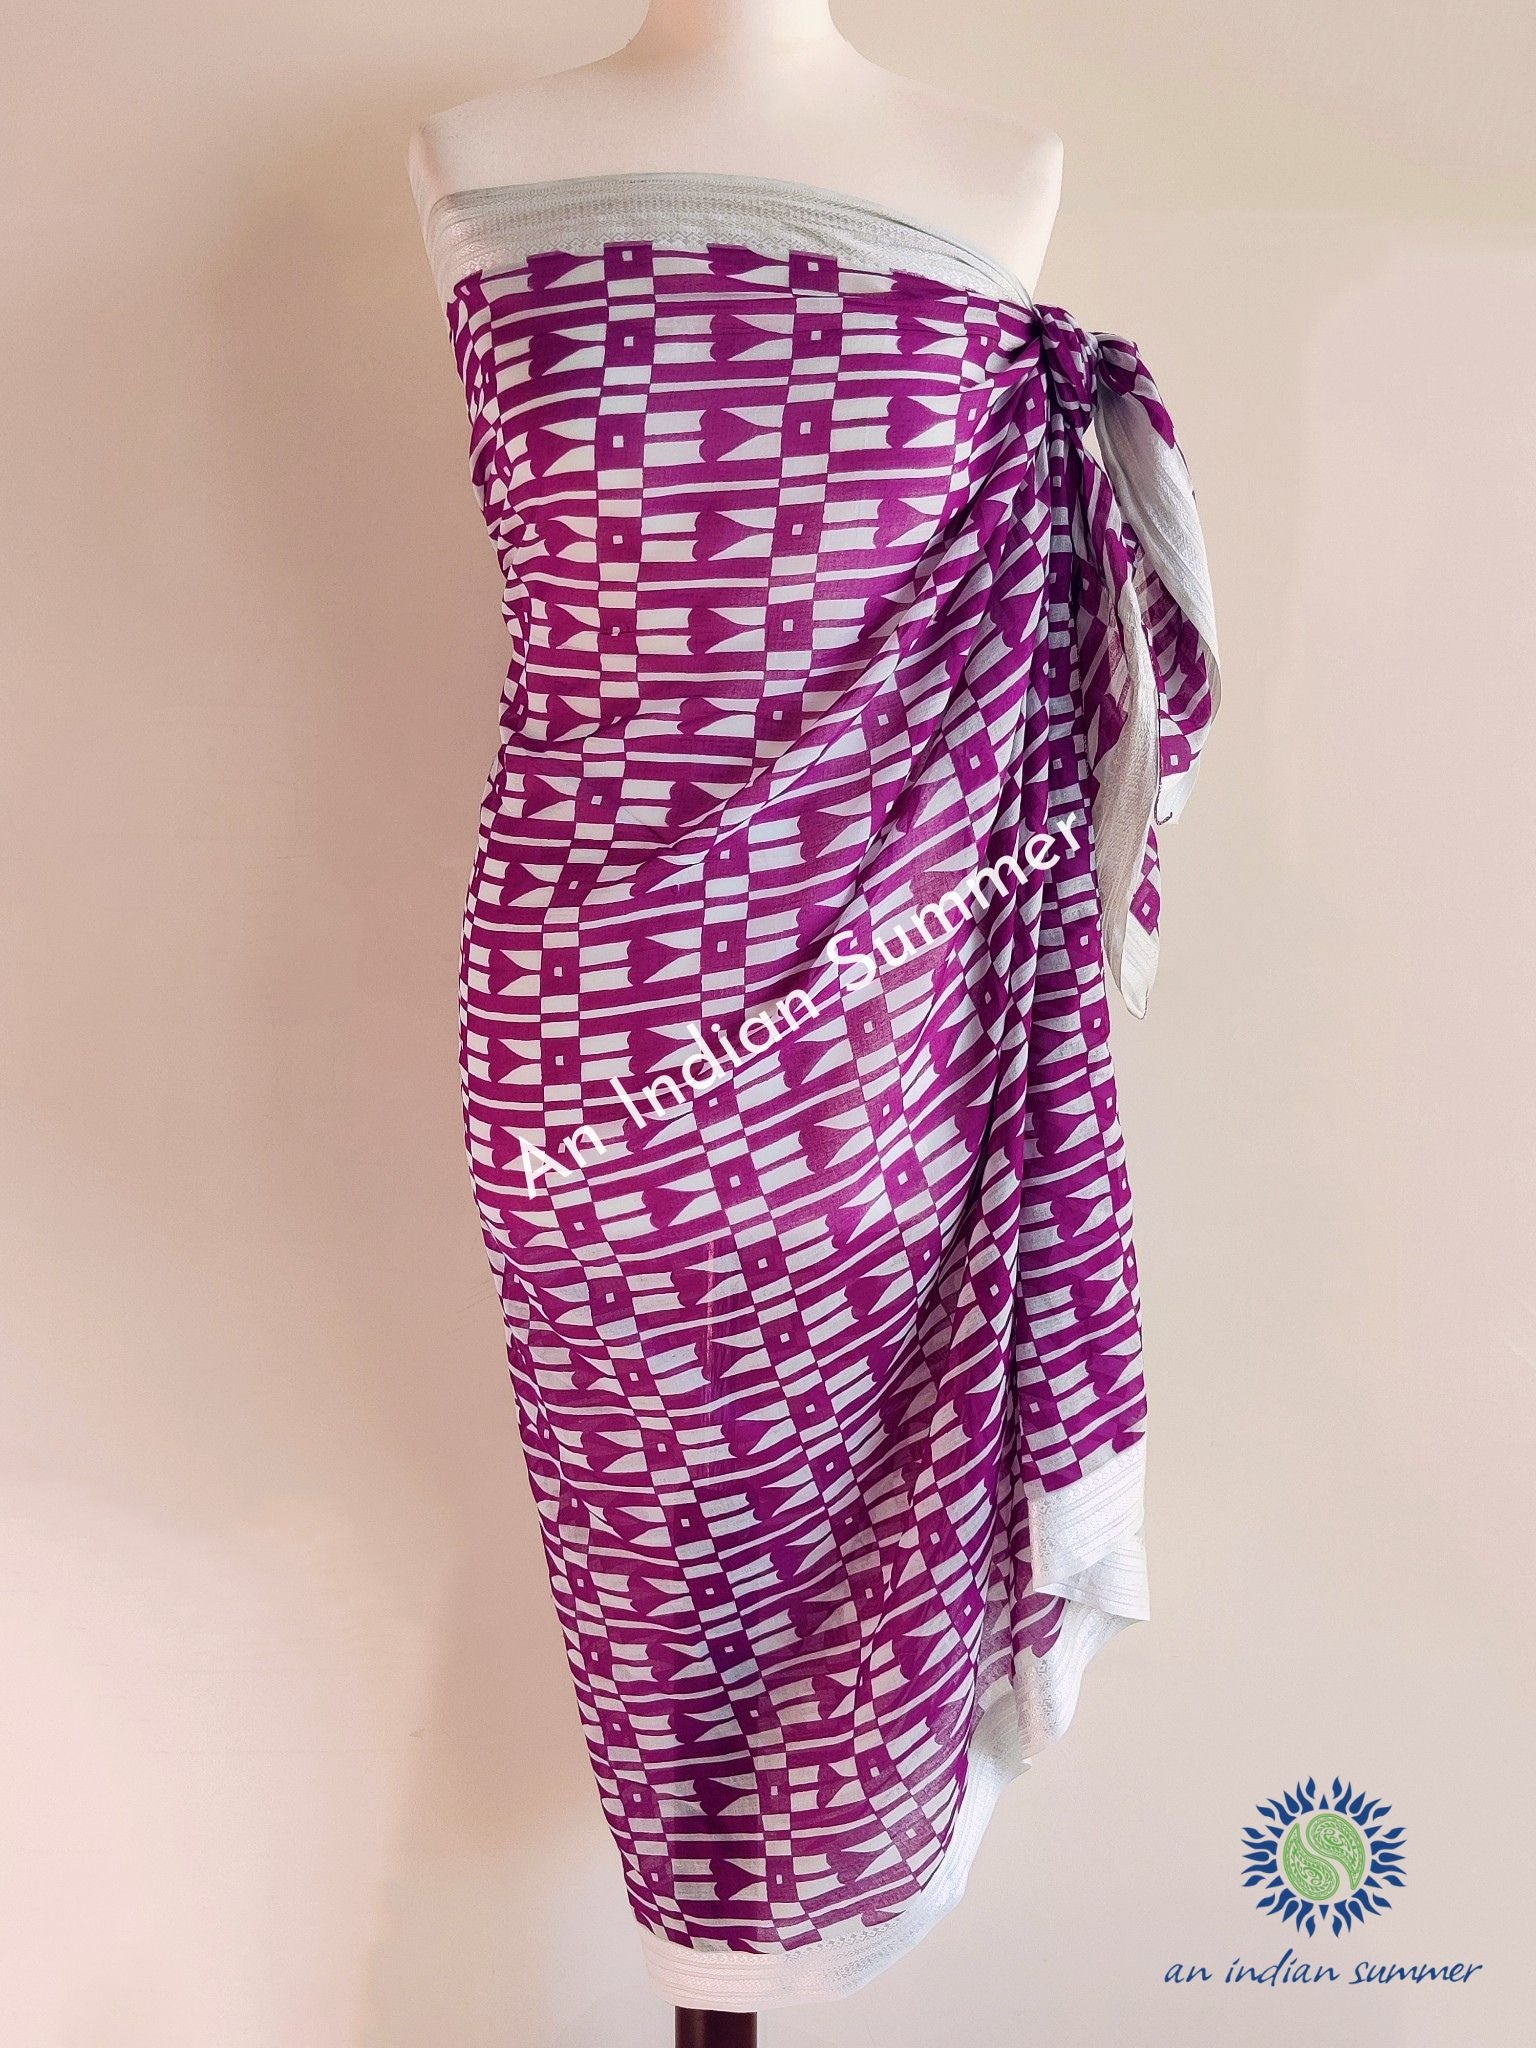 Hearts Woven Border Sarong Pareo | Magenta | Hand Block Printed | Soft Cotton Voile | An Indian Summer | Seasonless Timeless Sustainable Ethical Authentic Artisan Conscious Clothing Lifestyle Brand